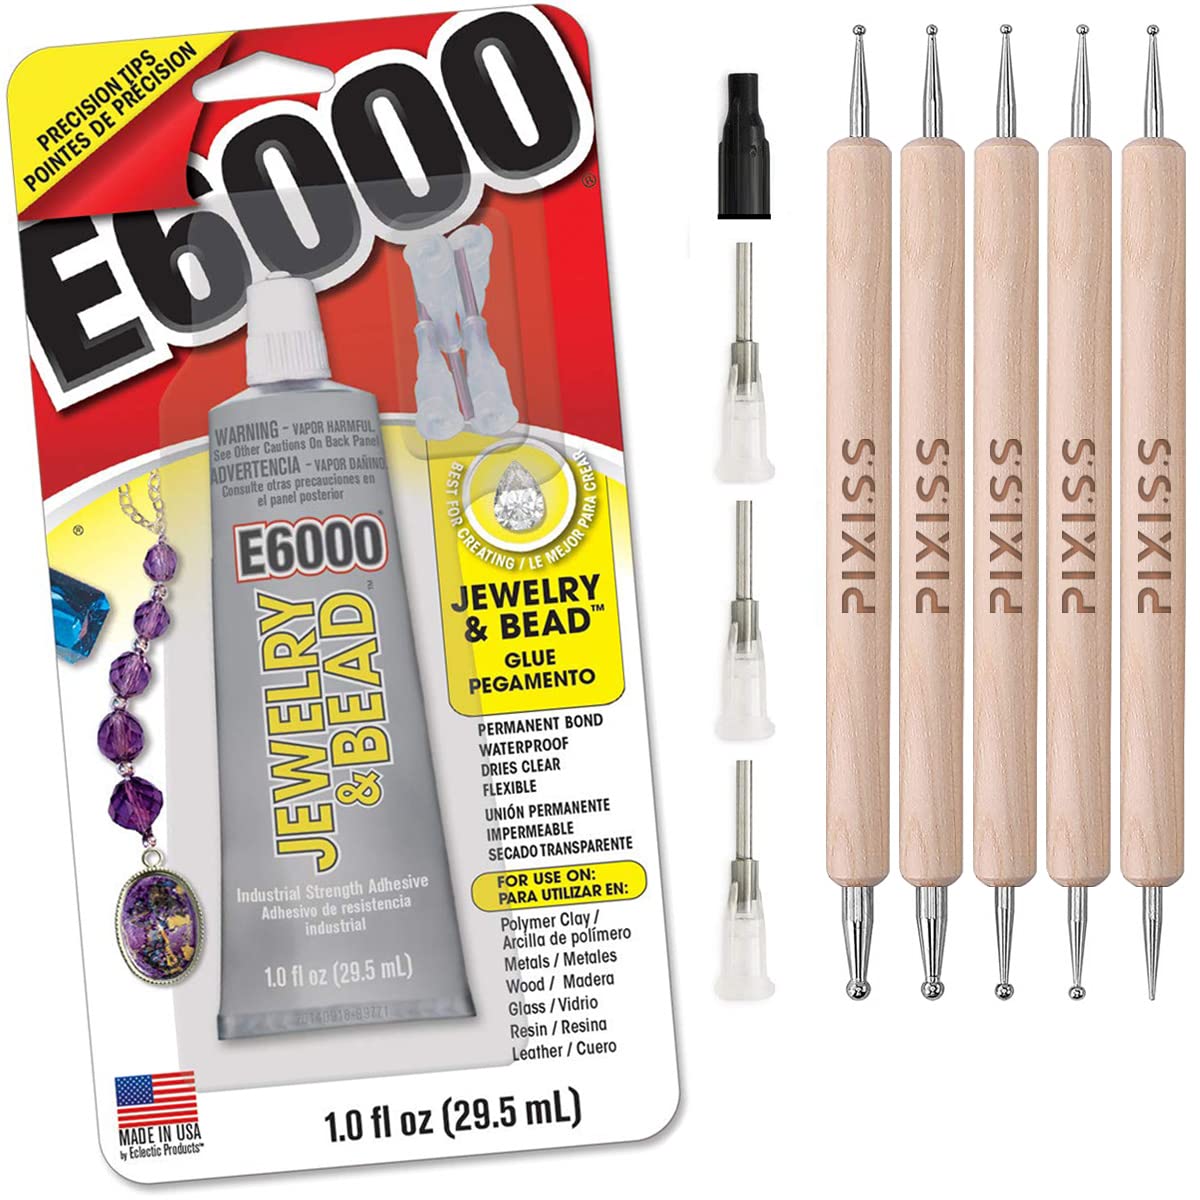  E6000 8-Pack 0.18 Ounce Bottles Industrial Strength Adhesive  for Crafting and Pixiss Wooden Art Dotting Stylus Pens 5 pcs Set -  Rhinestone Applicator Application Kit : Arts, Crafts & Sewing